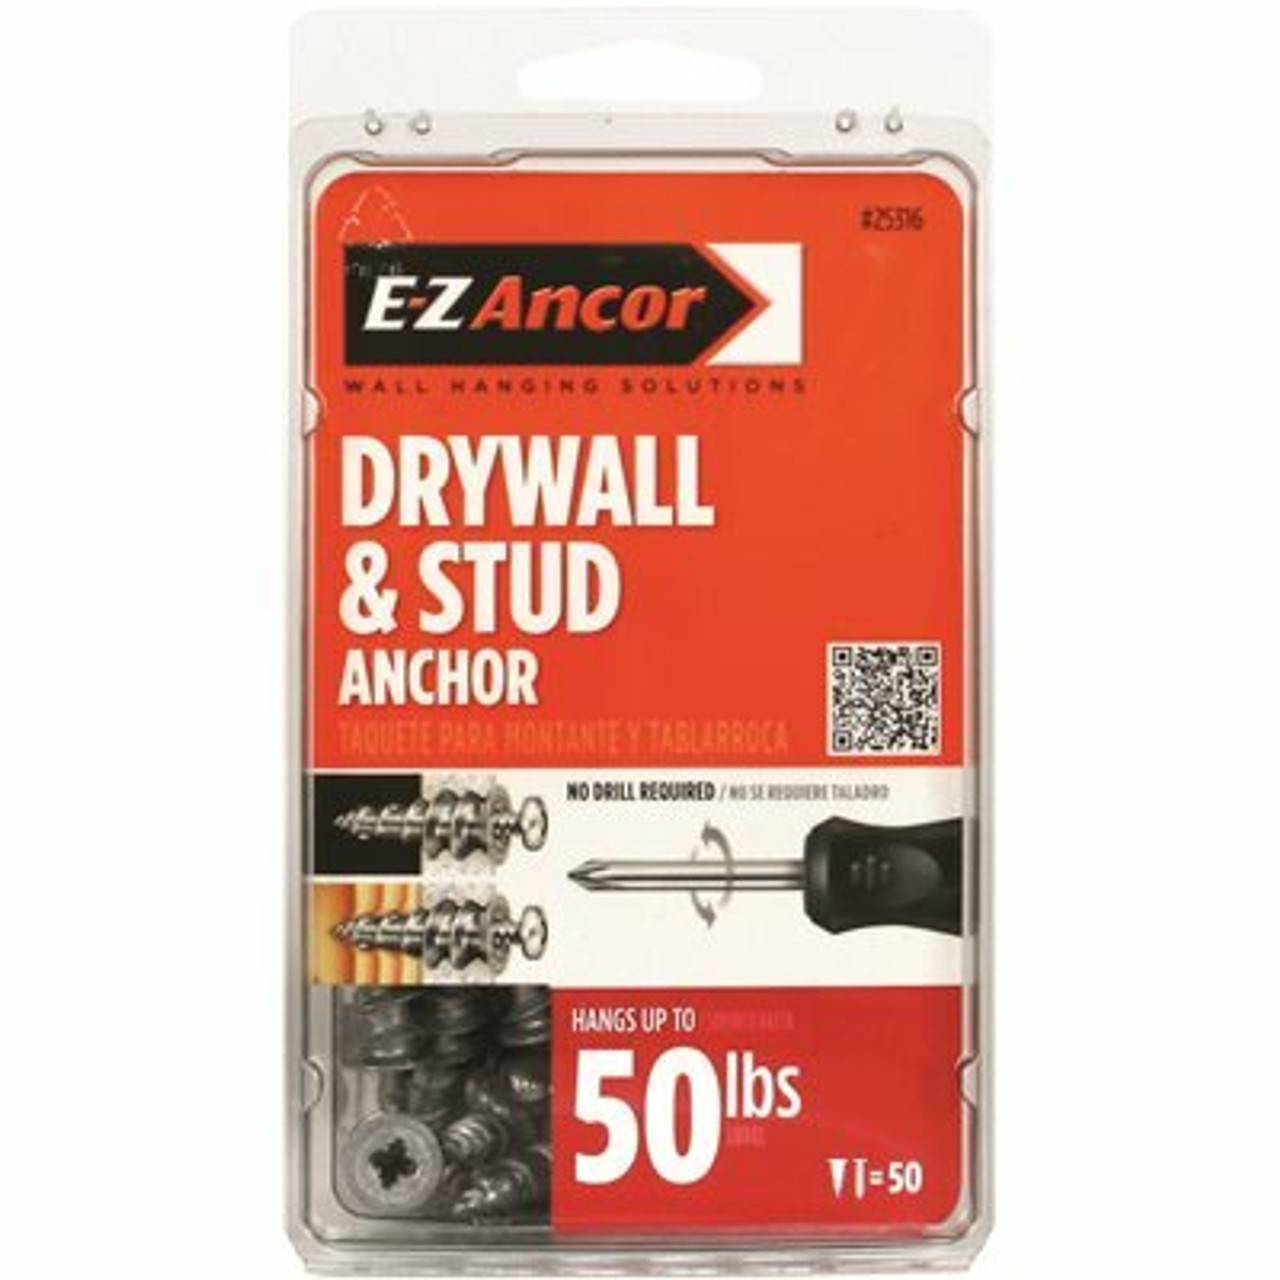 E-Z Ancor Stud Solver #7 X 1-1/4 In. Zinc-Plated Phillips Flat-Head Drywall Anchors (50-Pack)